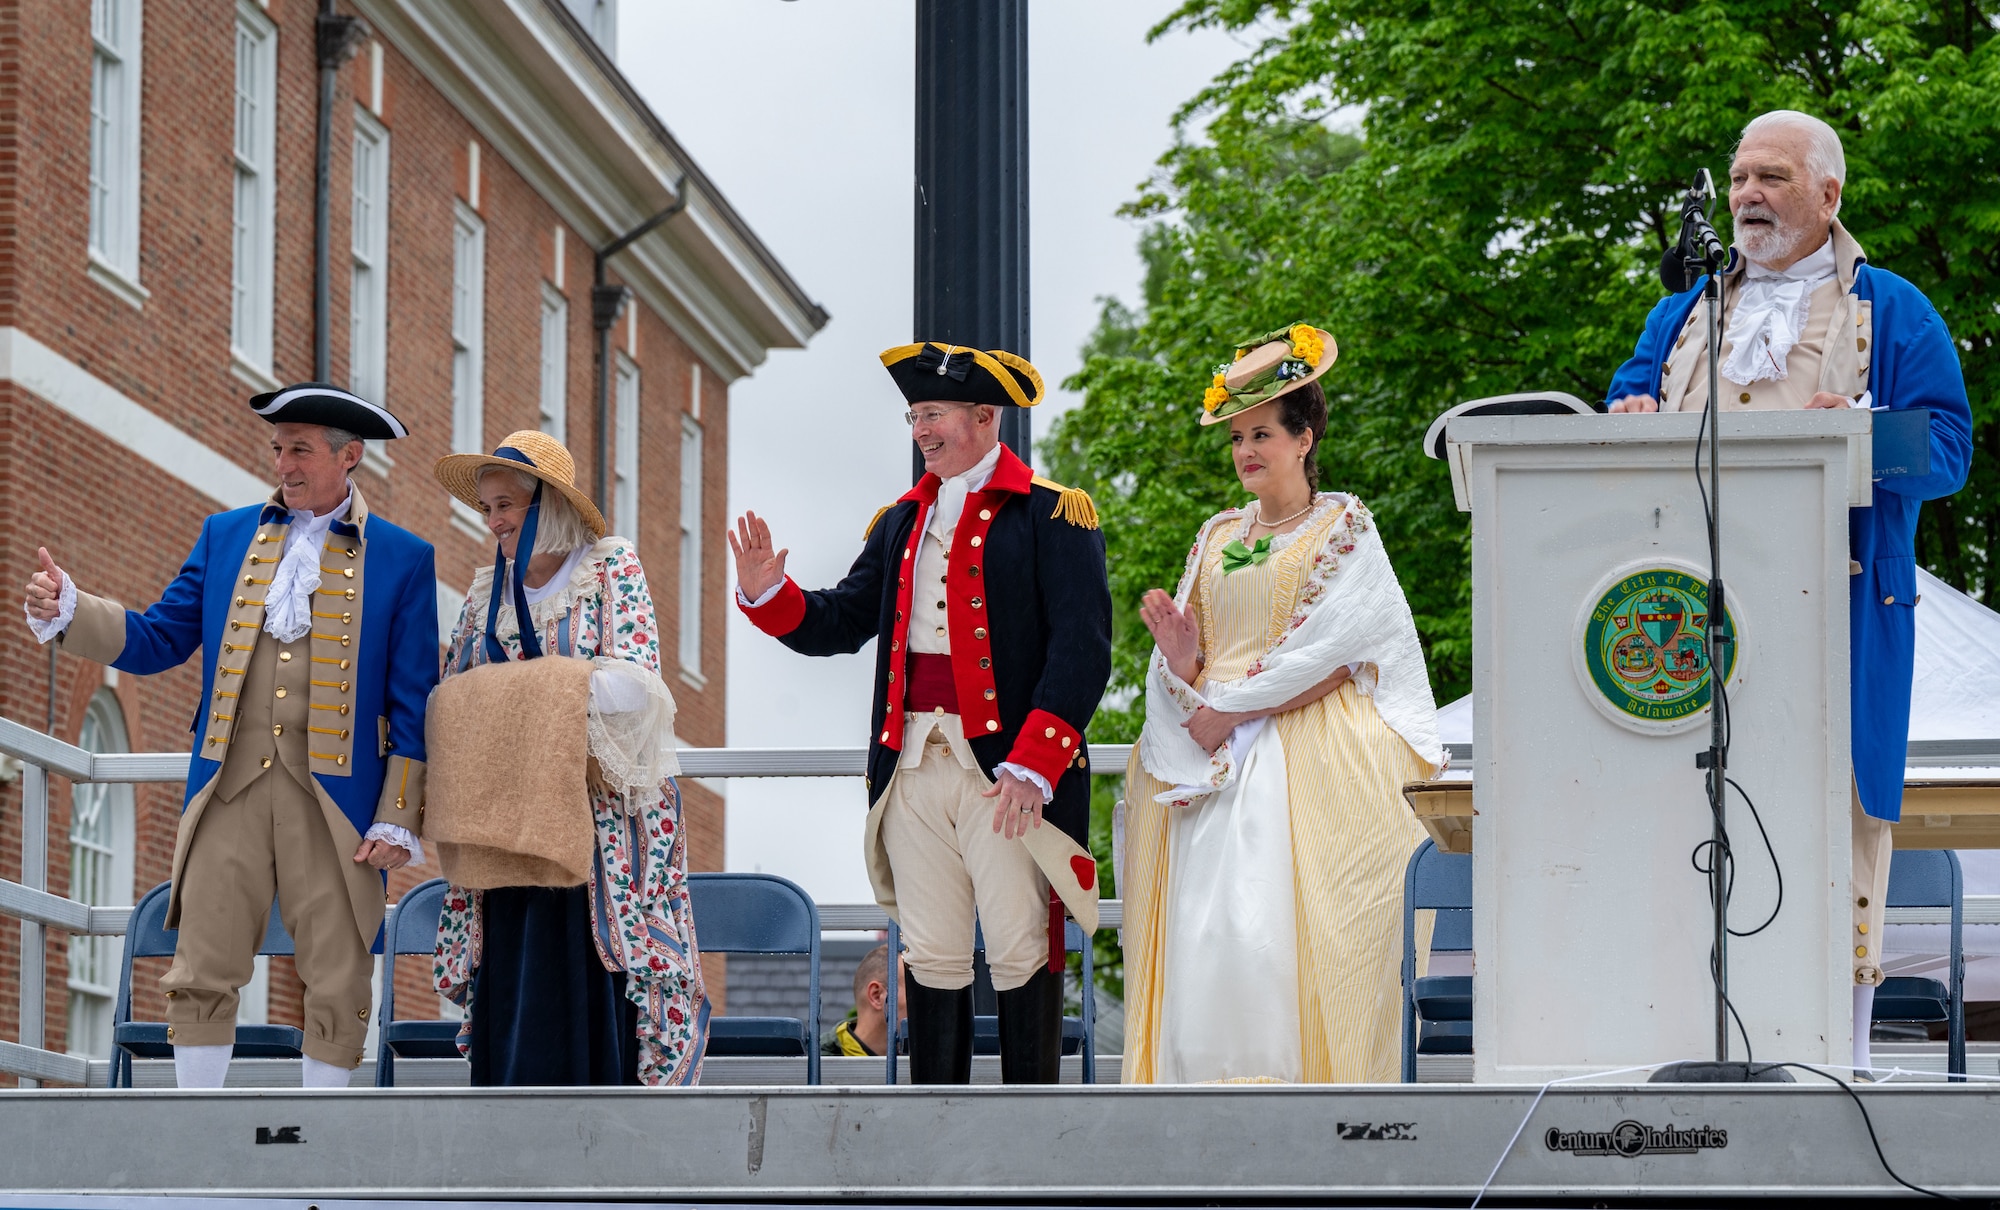 U.S. Air Force Col. Chris McDonald, center, 436th Airlift Wing commander, and his wife, Diana McDonald, wave to parade participants in Dover, Delaware, May 4, 2024. The McDonald’s dressed in colonial attire for the 91st Annual Dover Days Festival and Parade, an event that highlights the First State’s history and heritage. (U.S. Air Force photo by Airman 1st Class Amanda Jett)